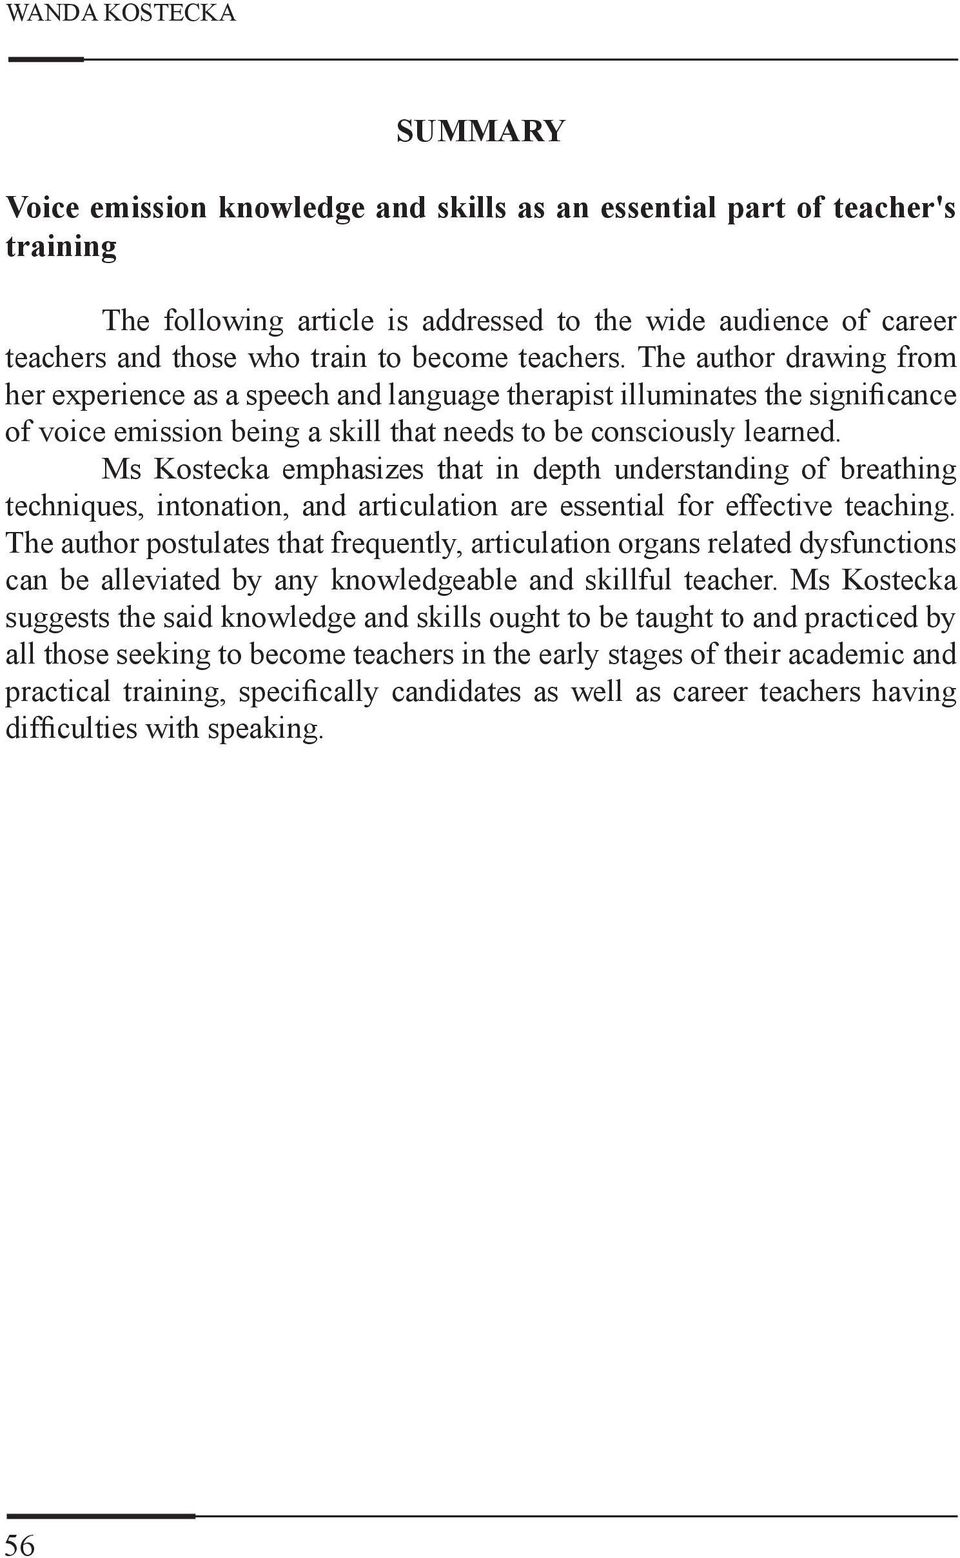 Ms Kostecka emphasizes that in depth understanding of breathing techniques, intonation, and articulation are essential for effective teaching.